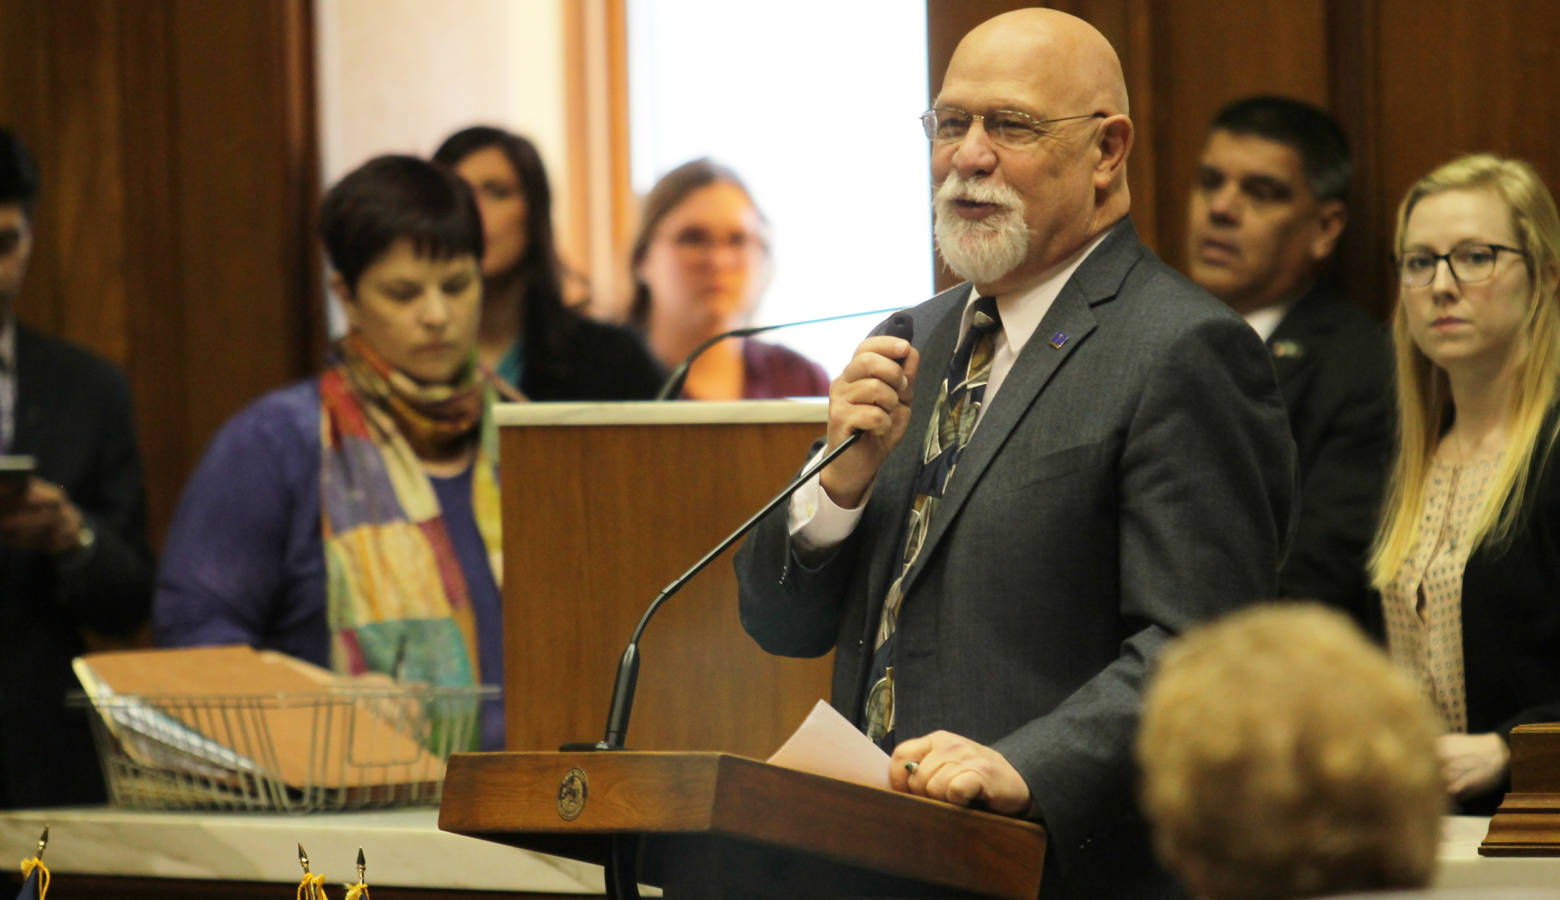 Rep. Tim Brown (R-Crawfordsville) chairs the House Ways and Means Committee. (Lauren Chapman/IPB News)